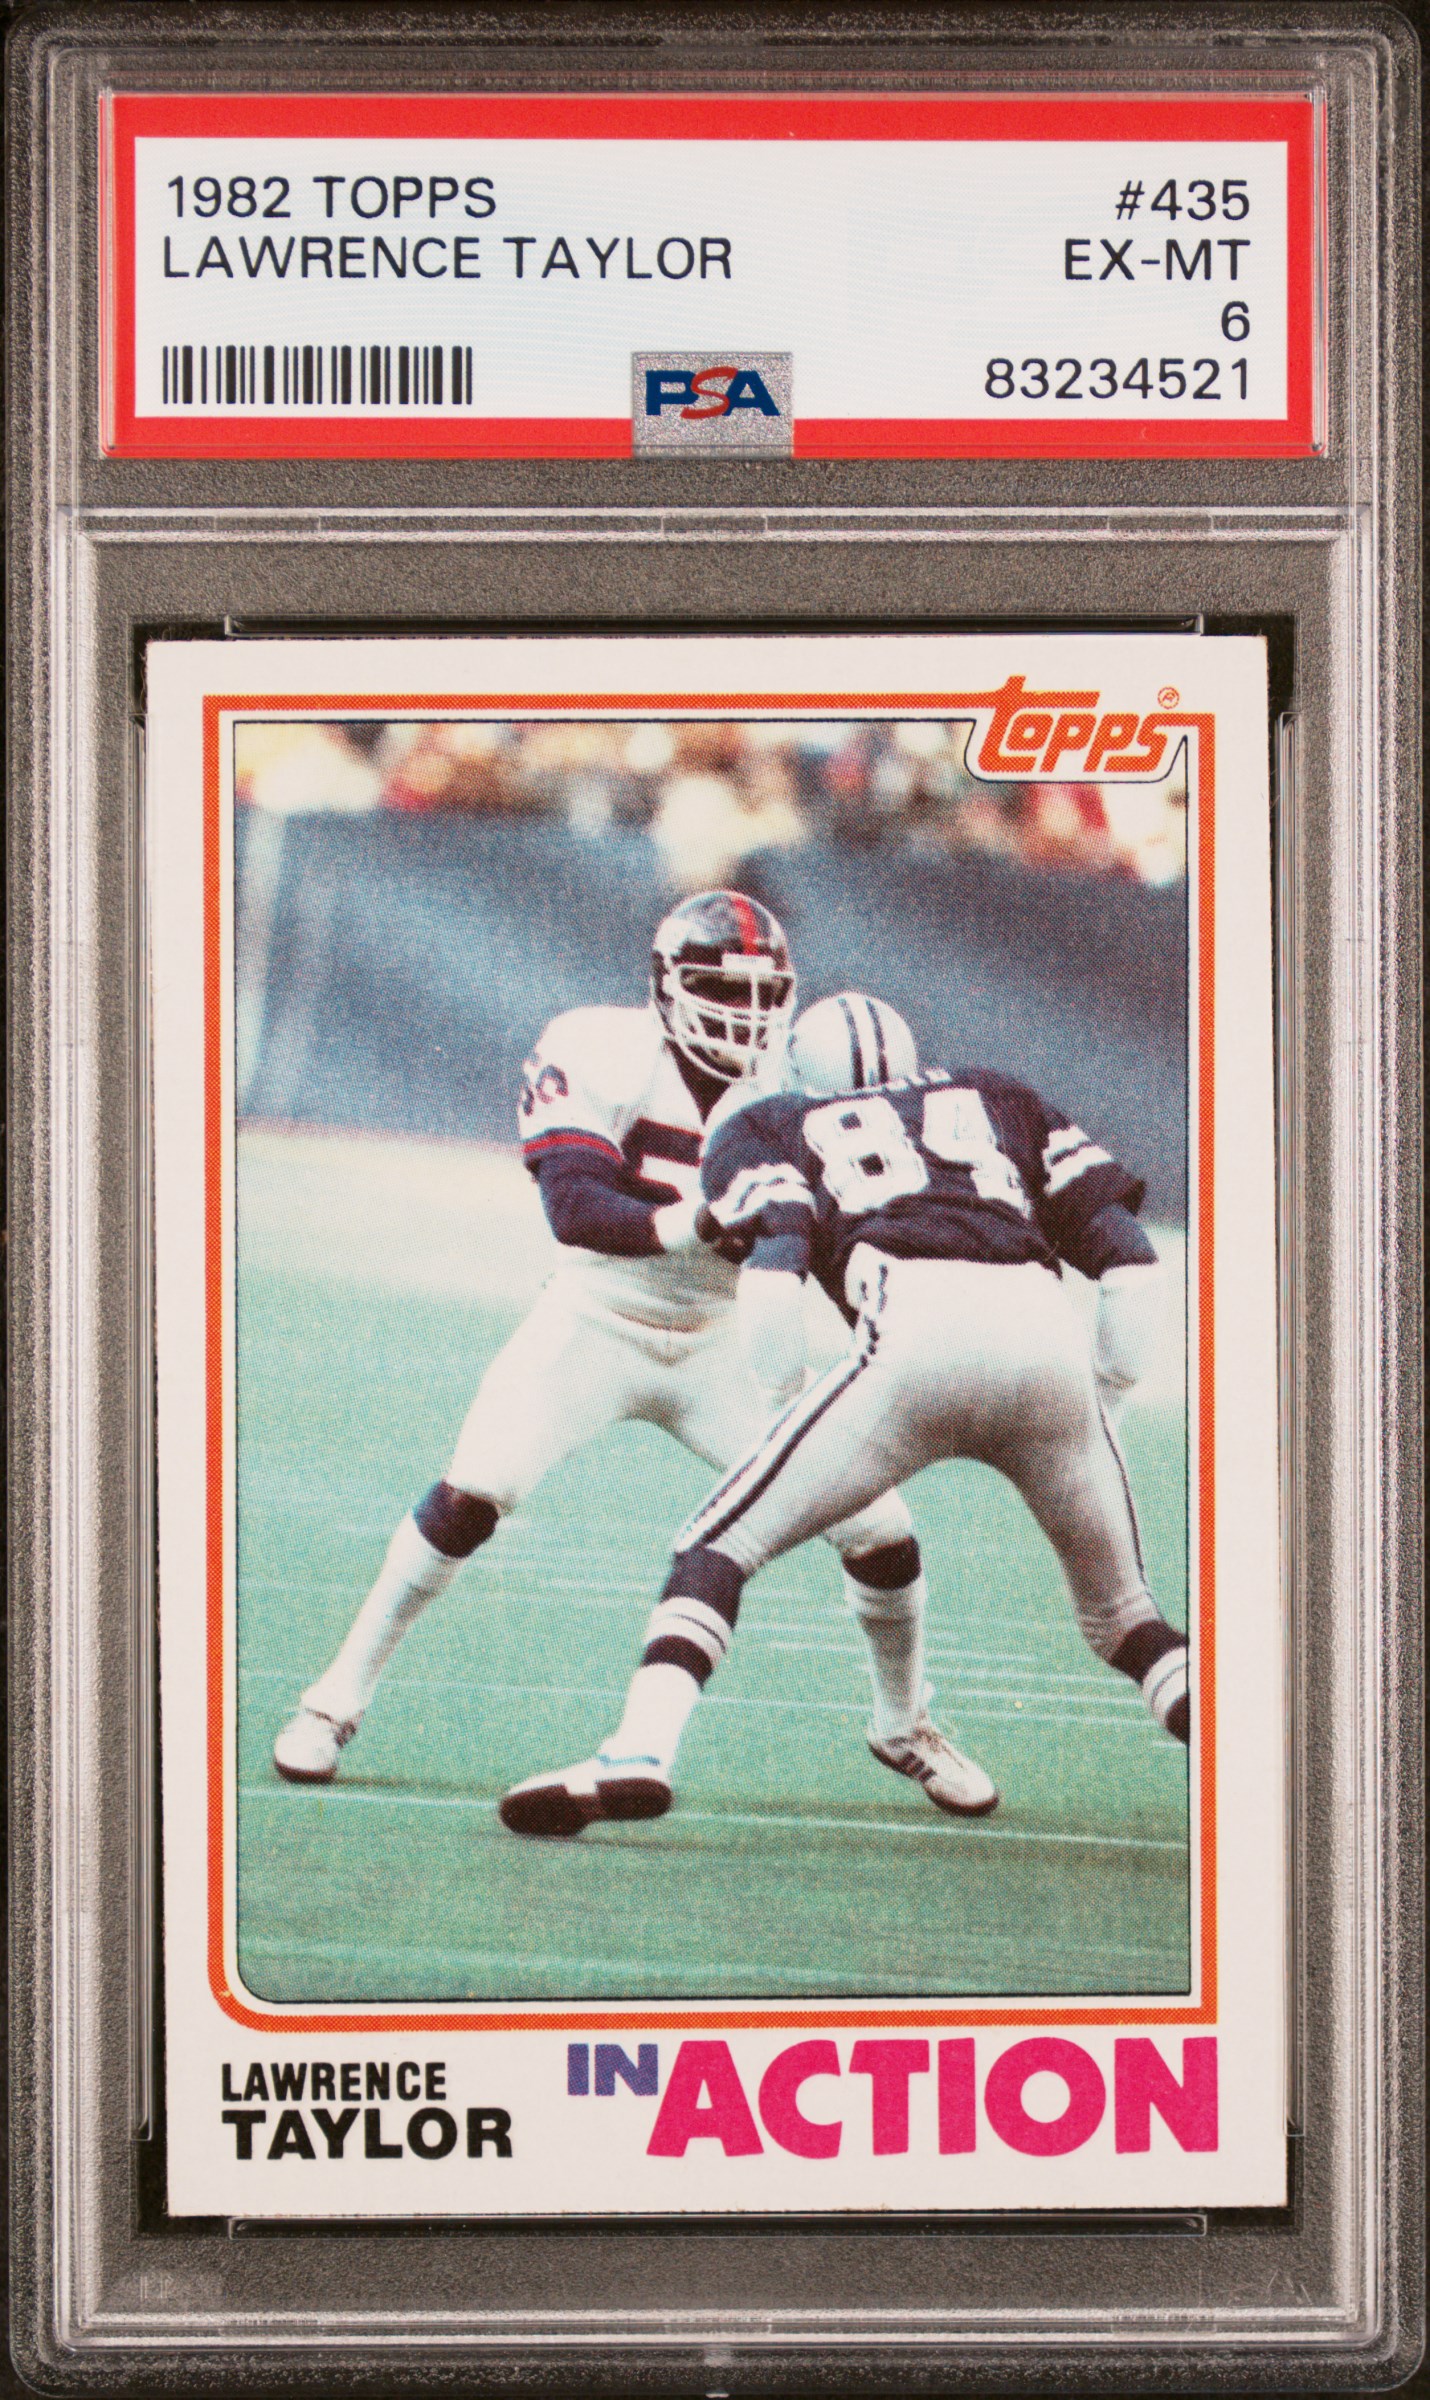 1982 Topps 435 Lawrence Taylor Rookie Card – PSA EX-MT 6